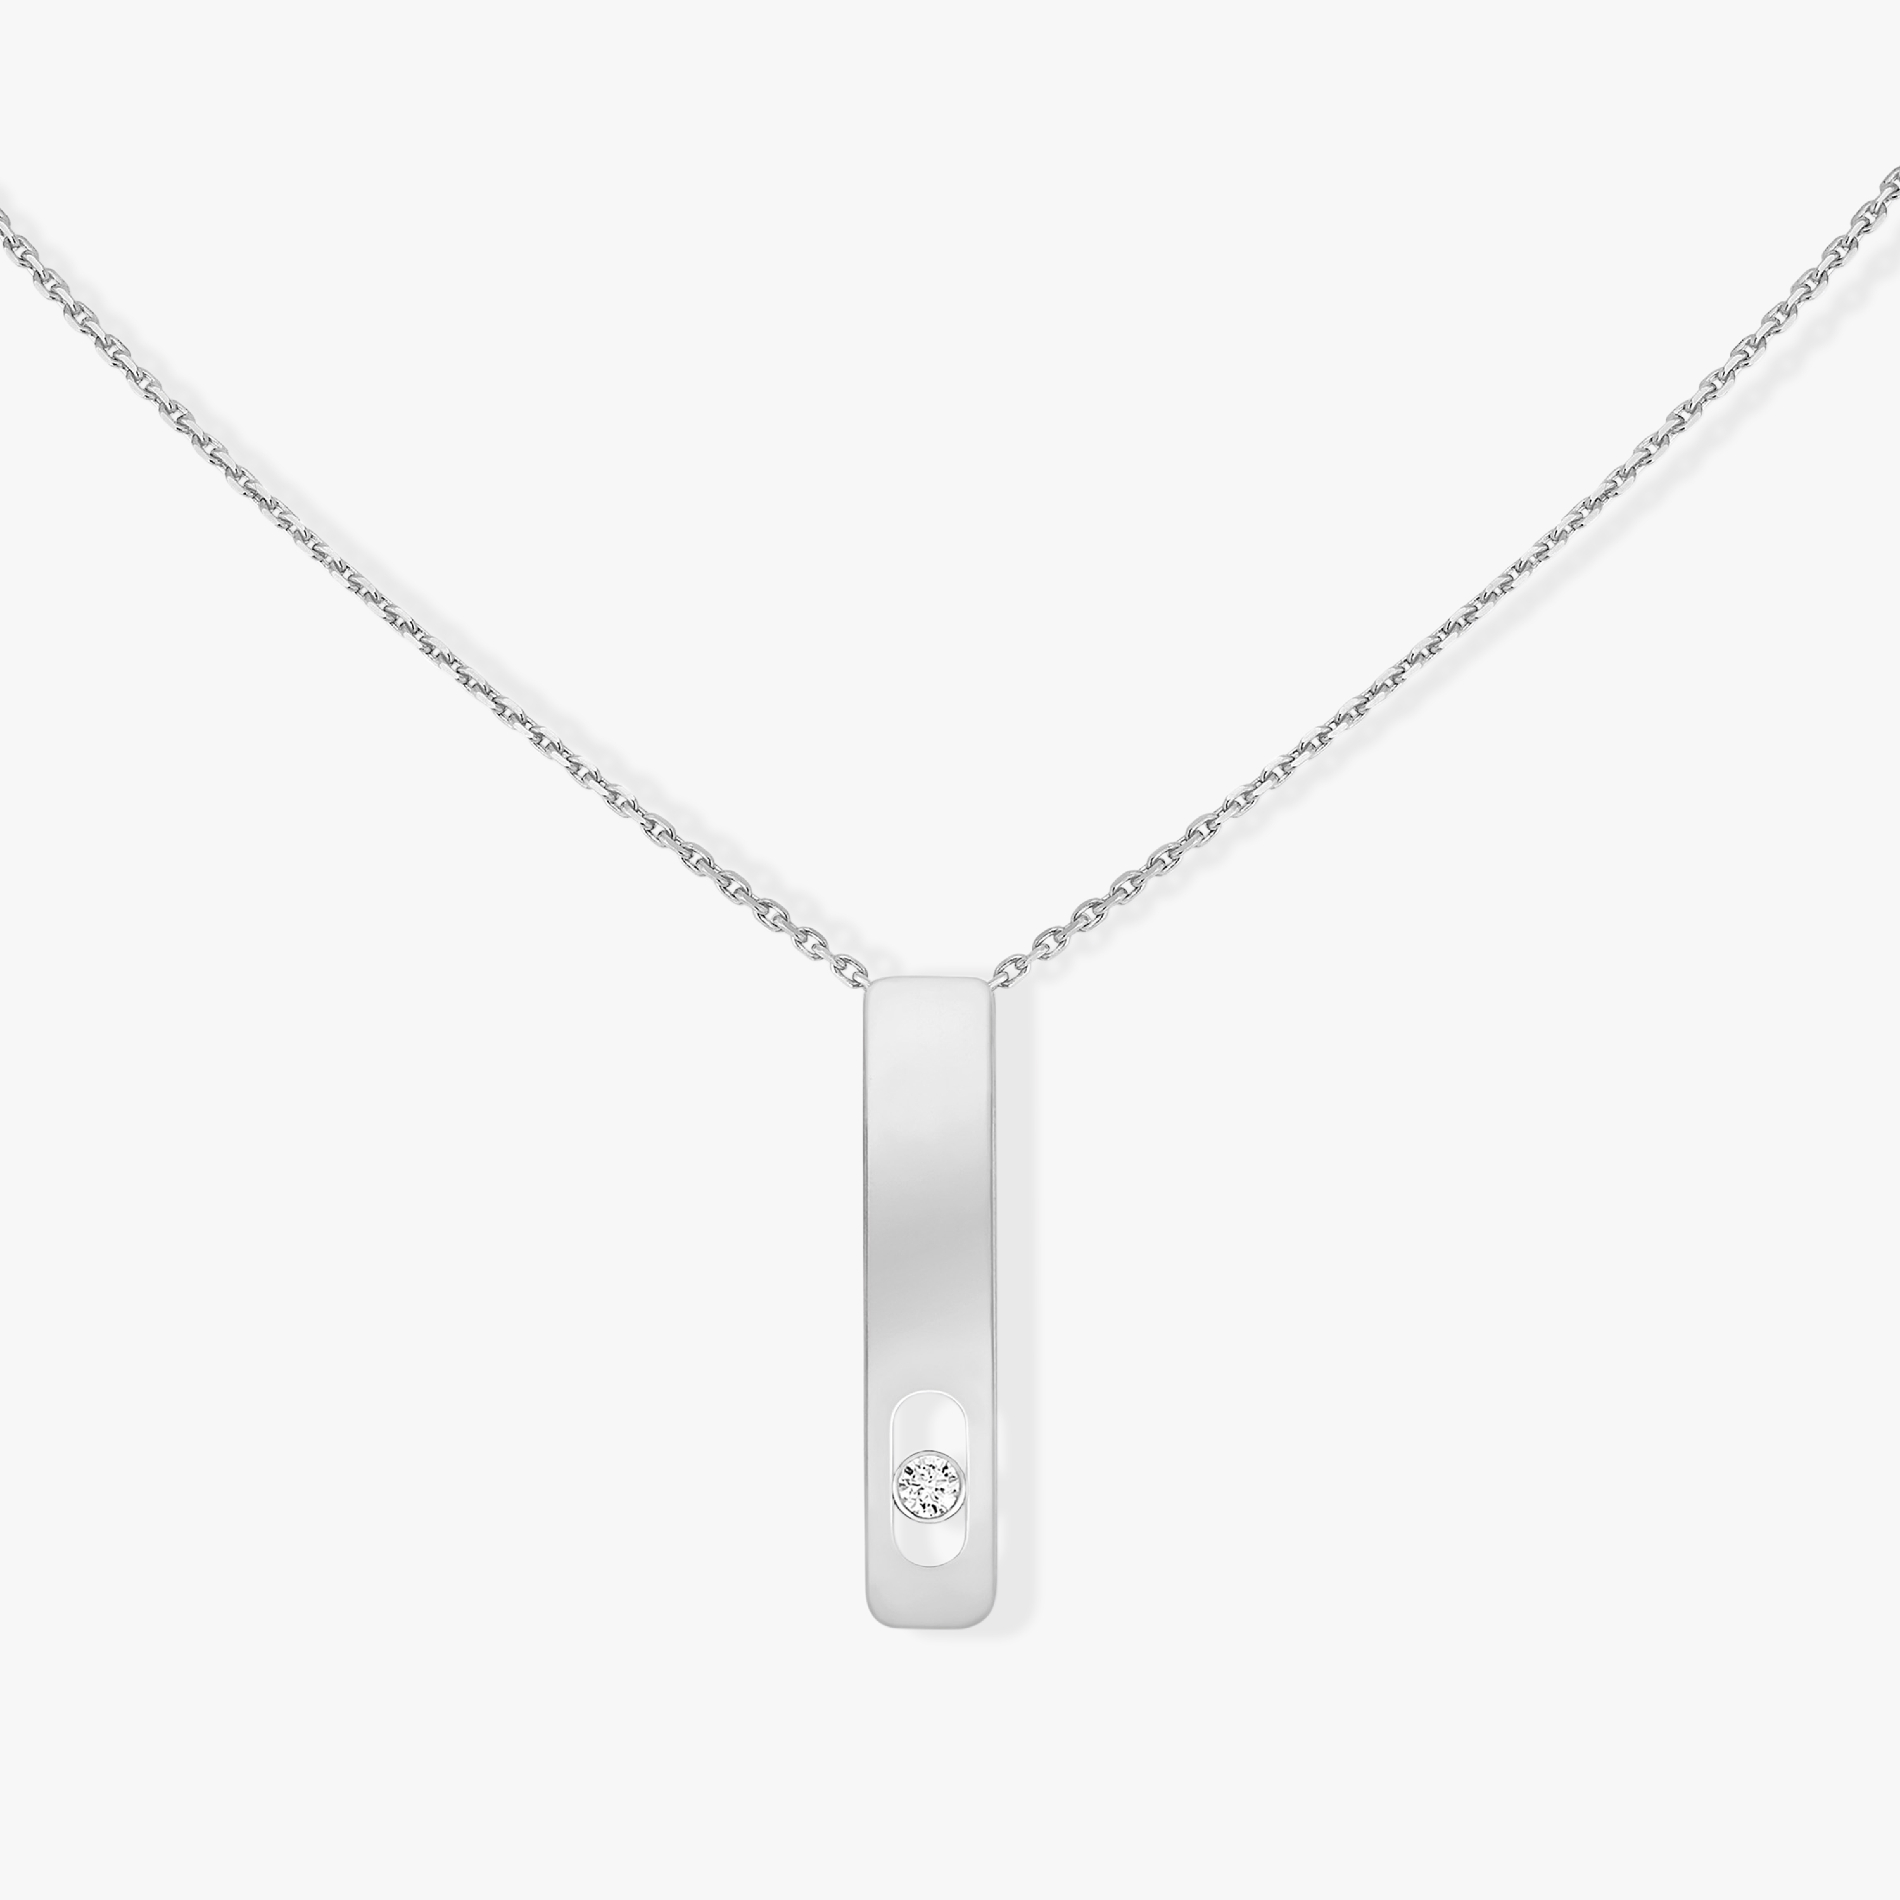 My First Diamond White Gold For Her Diamond Necklace 07498-WG